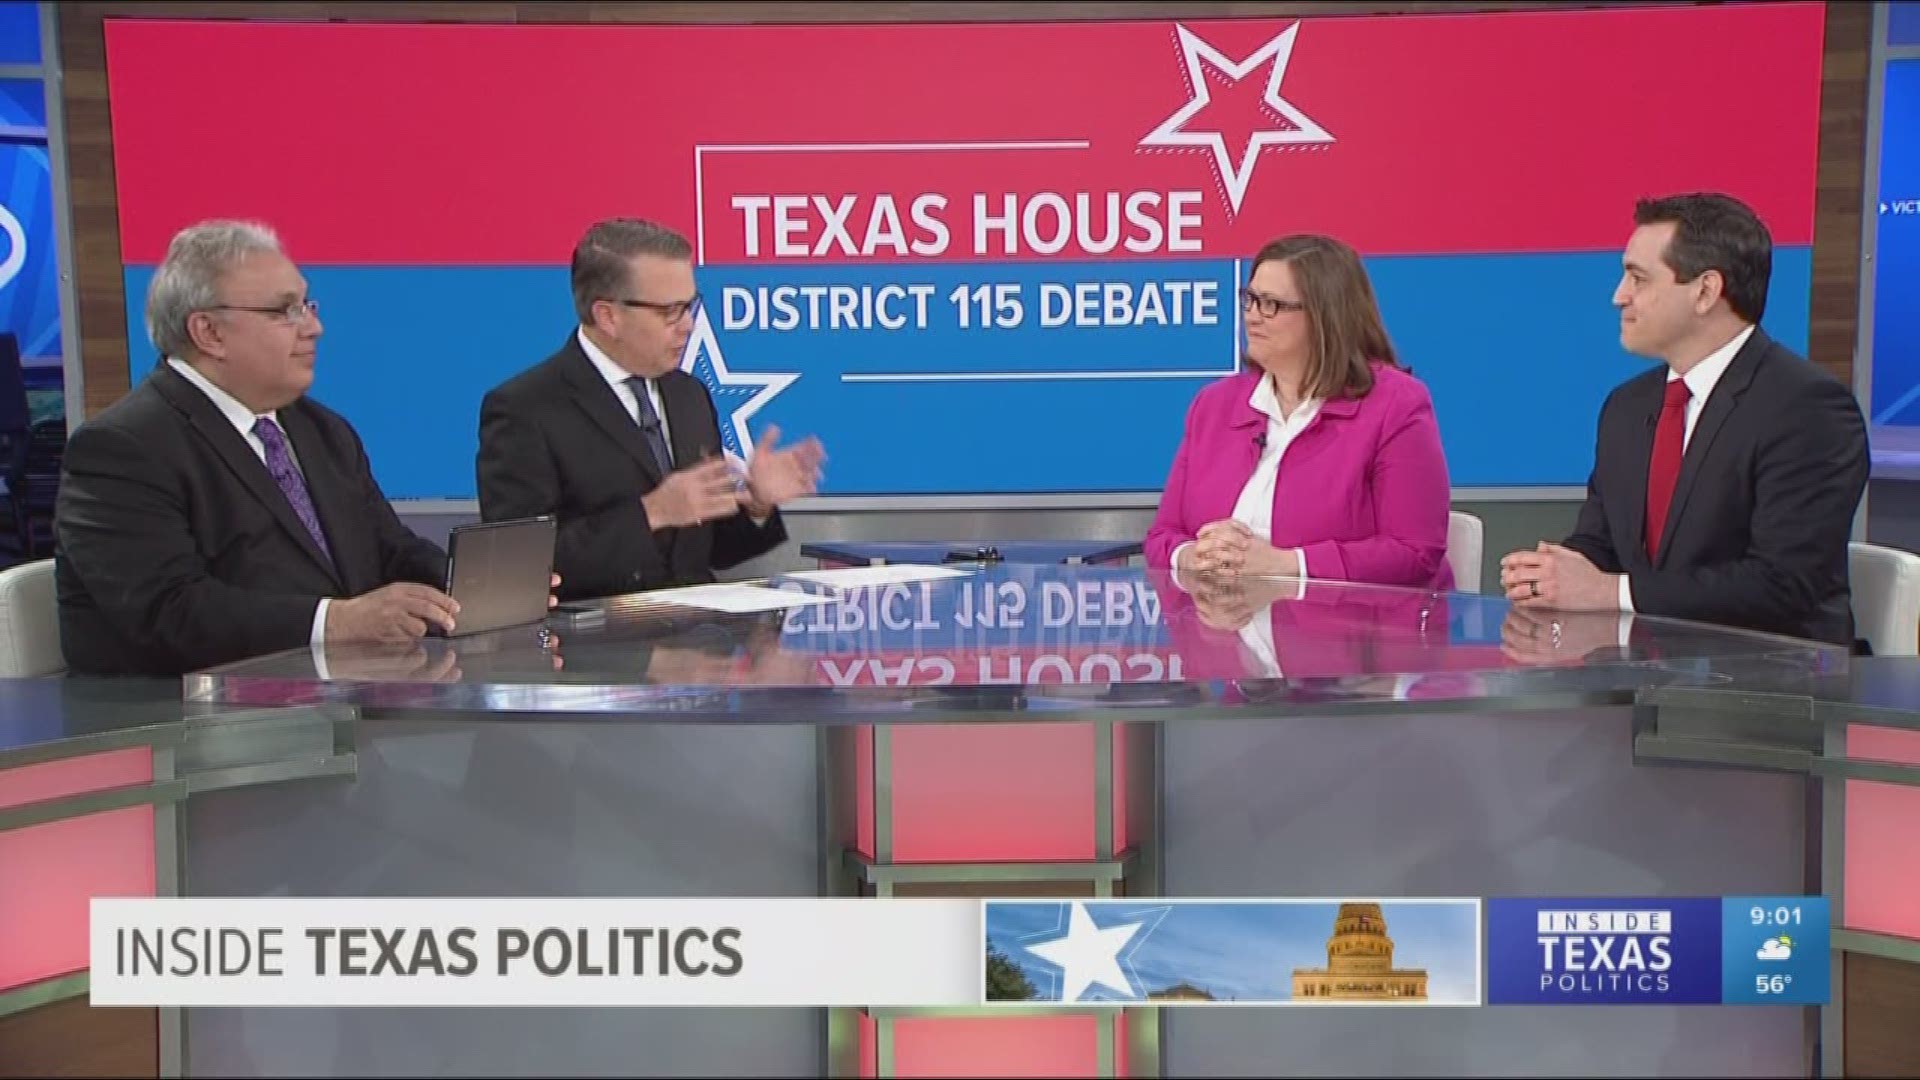 Inside Texas Politics began with a lively debate between the candidates vying for the Texas House District 115 seat. Located in the northwestern part of Dallas County which includes DFW Airport, Carrollton, Farmers Branch and part of Addison, District 115